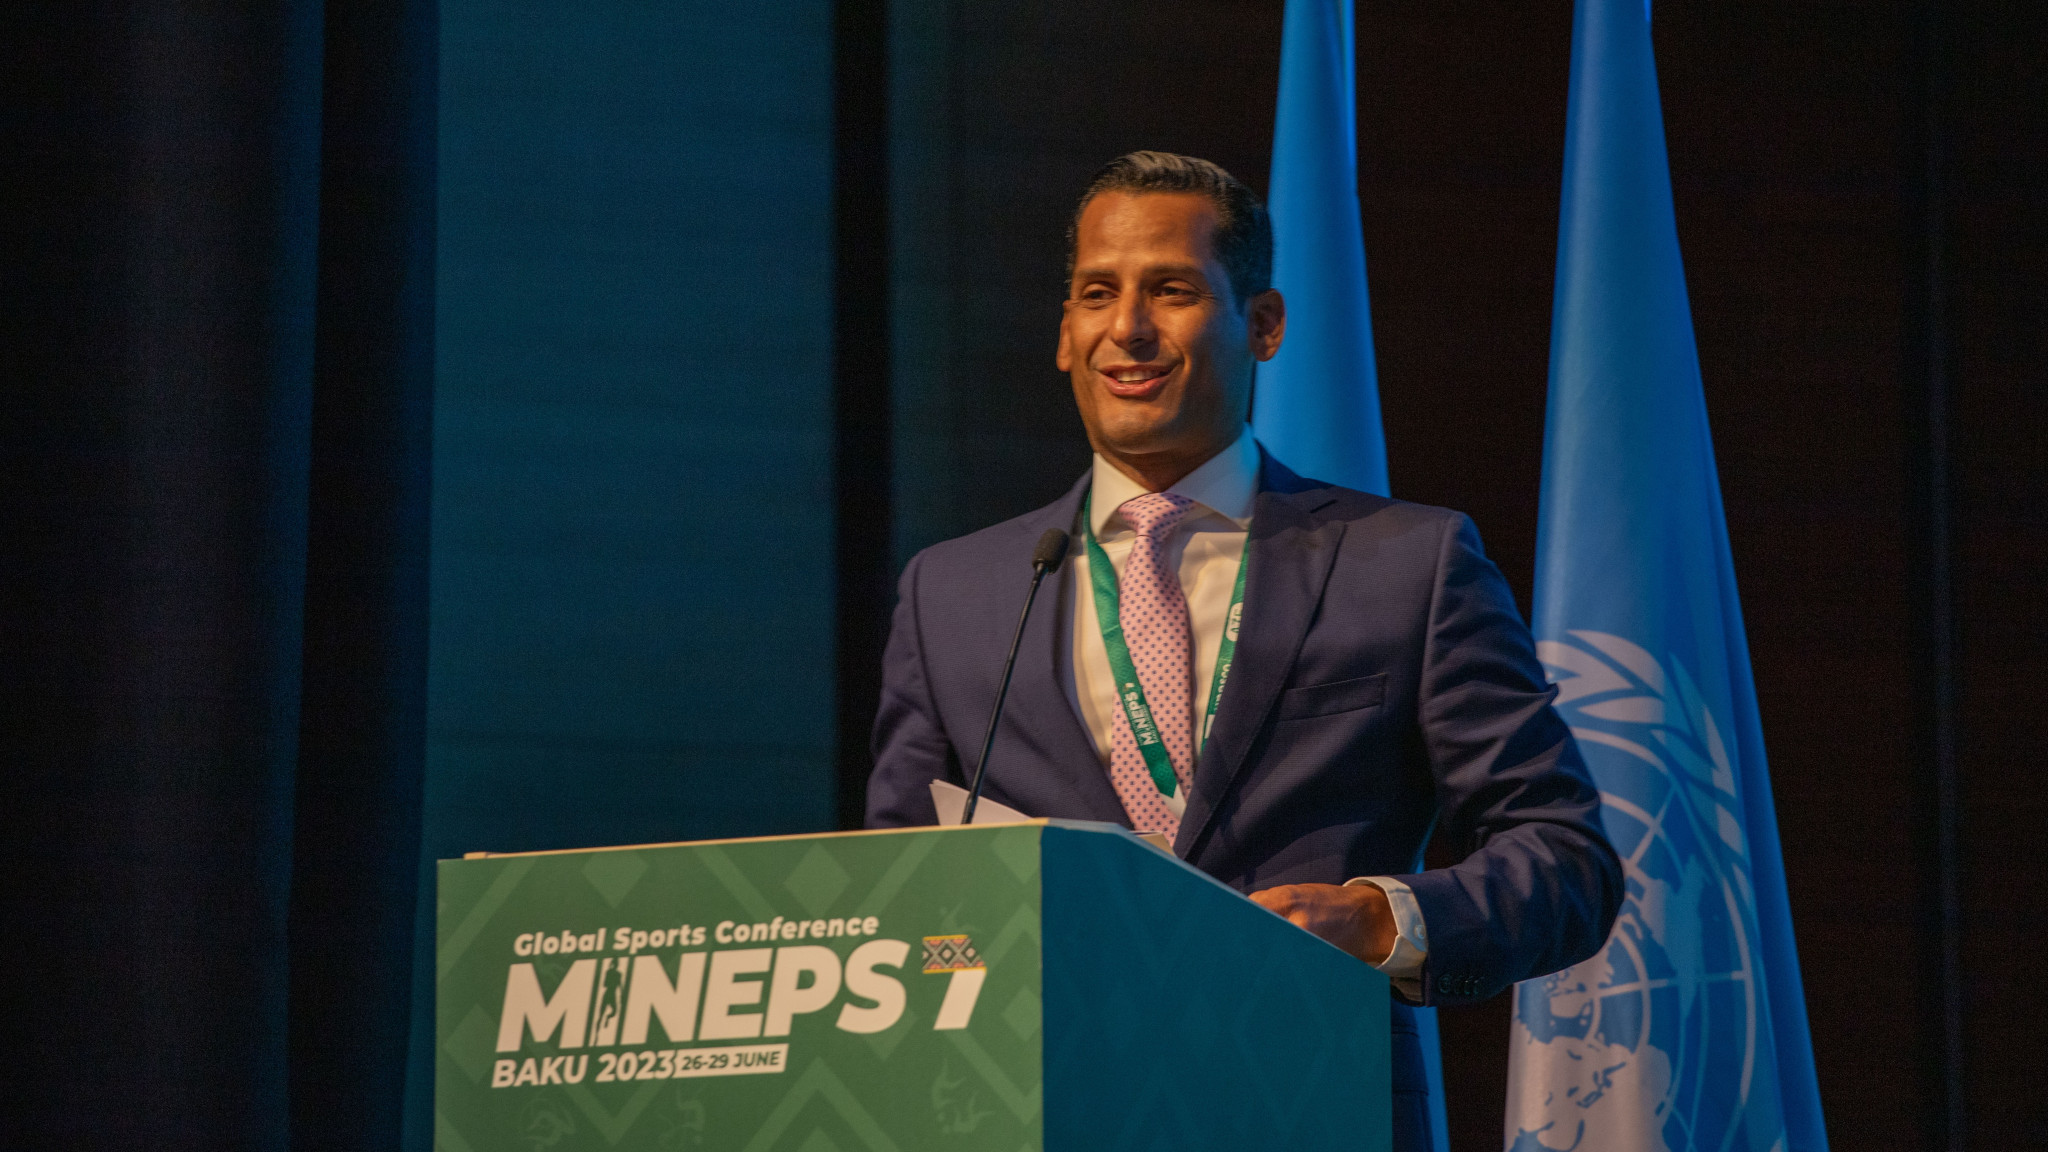 Marcos Diaz, the chair of the eighth session of the Conference of Parties, hailed the Fit for Life Alliance's measures to tackle doping in sport ©MINEPS VII